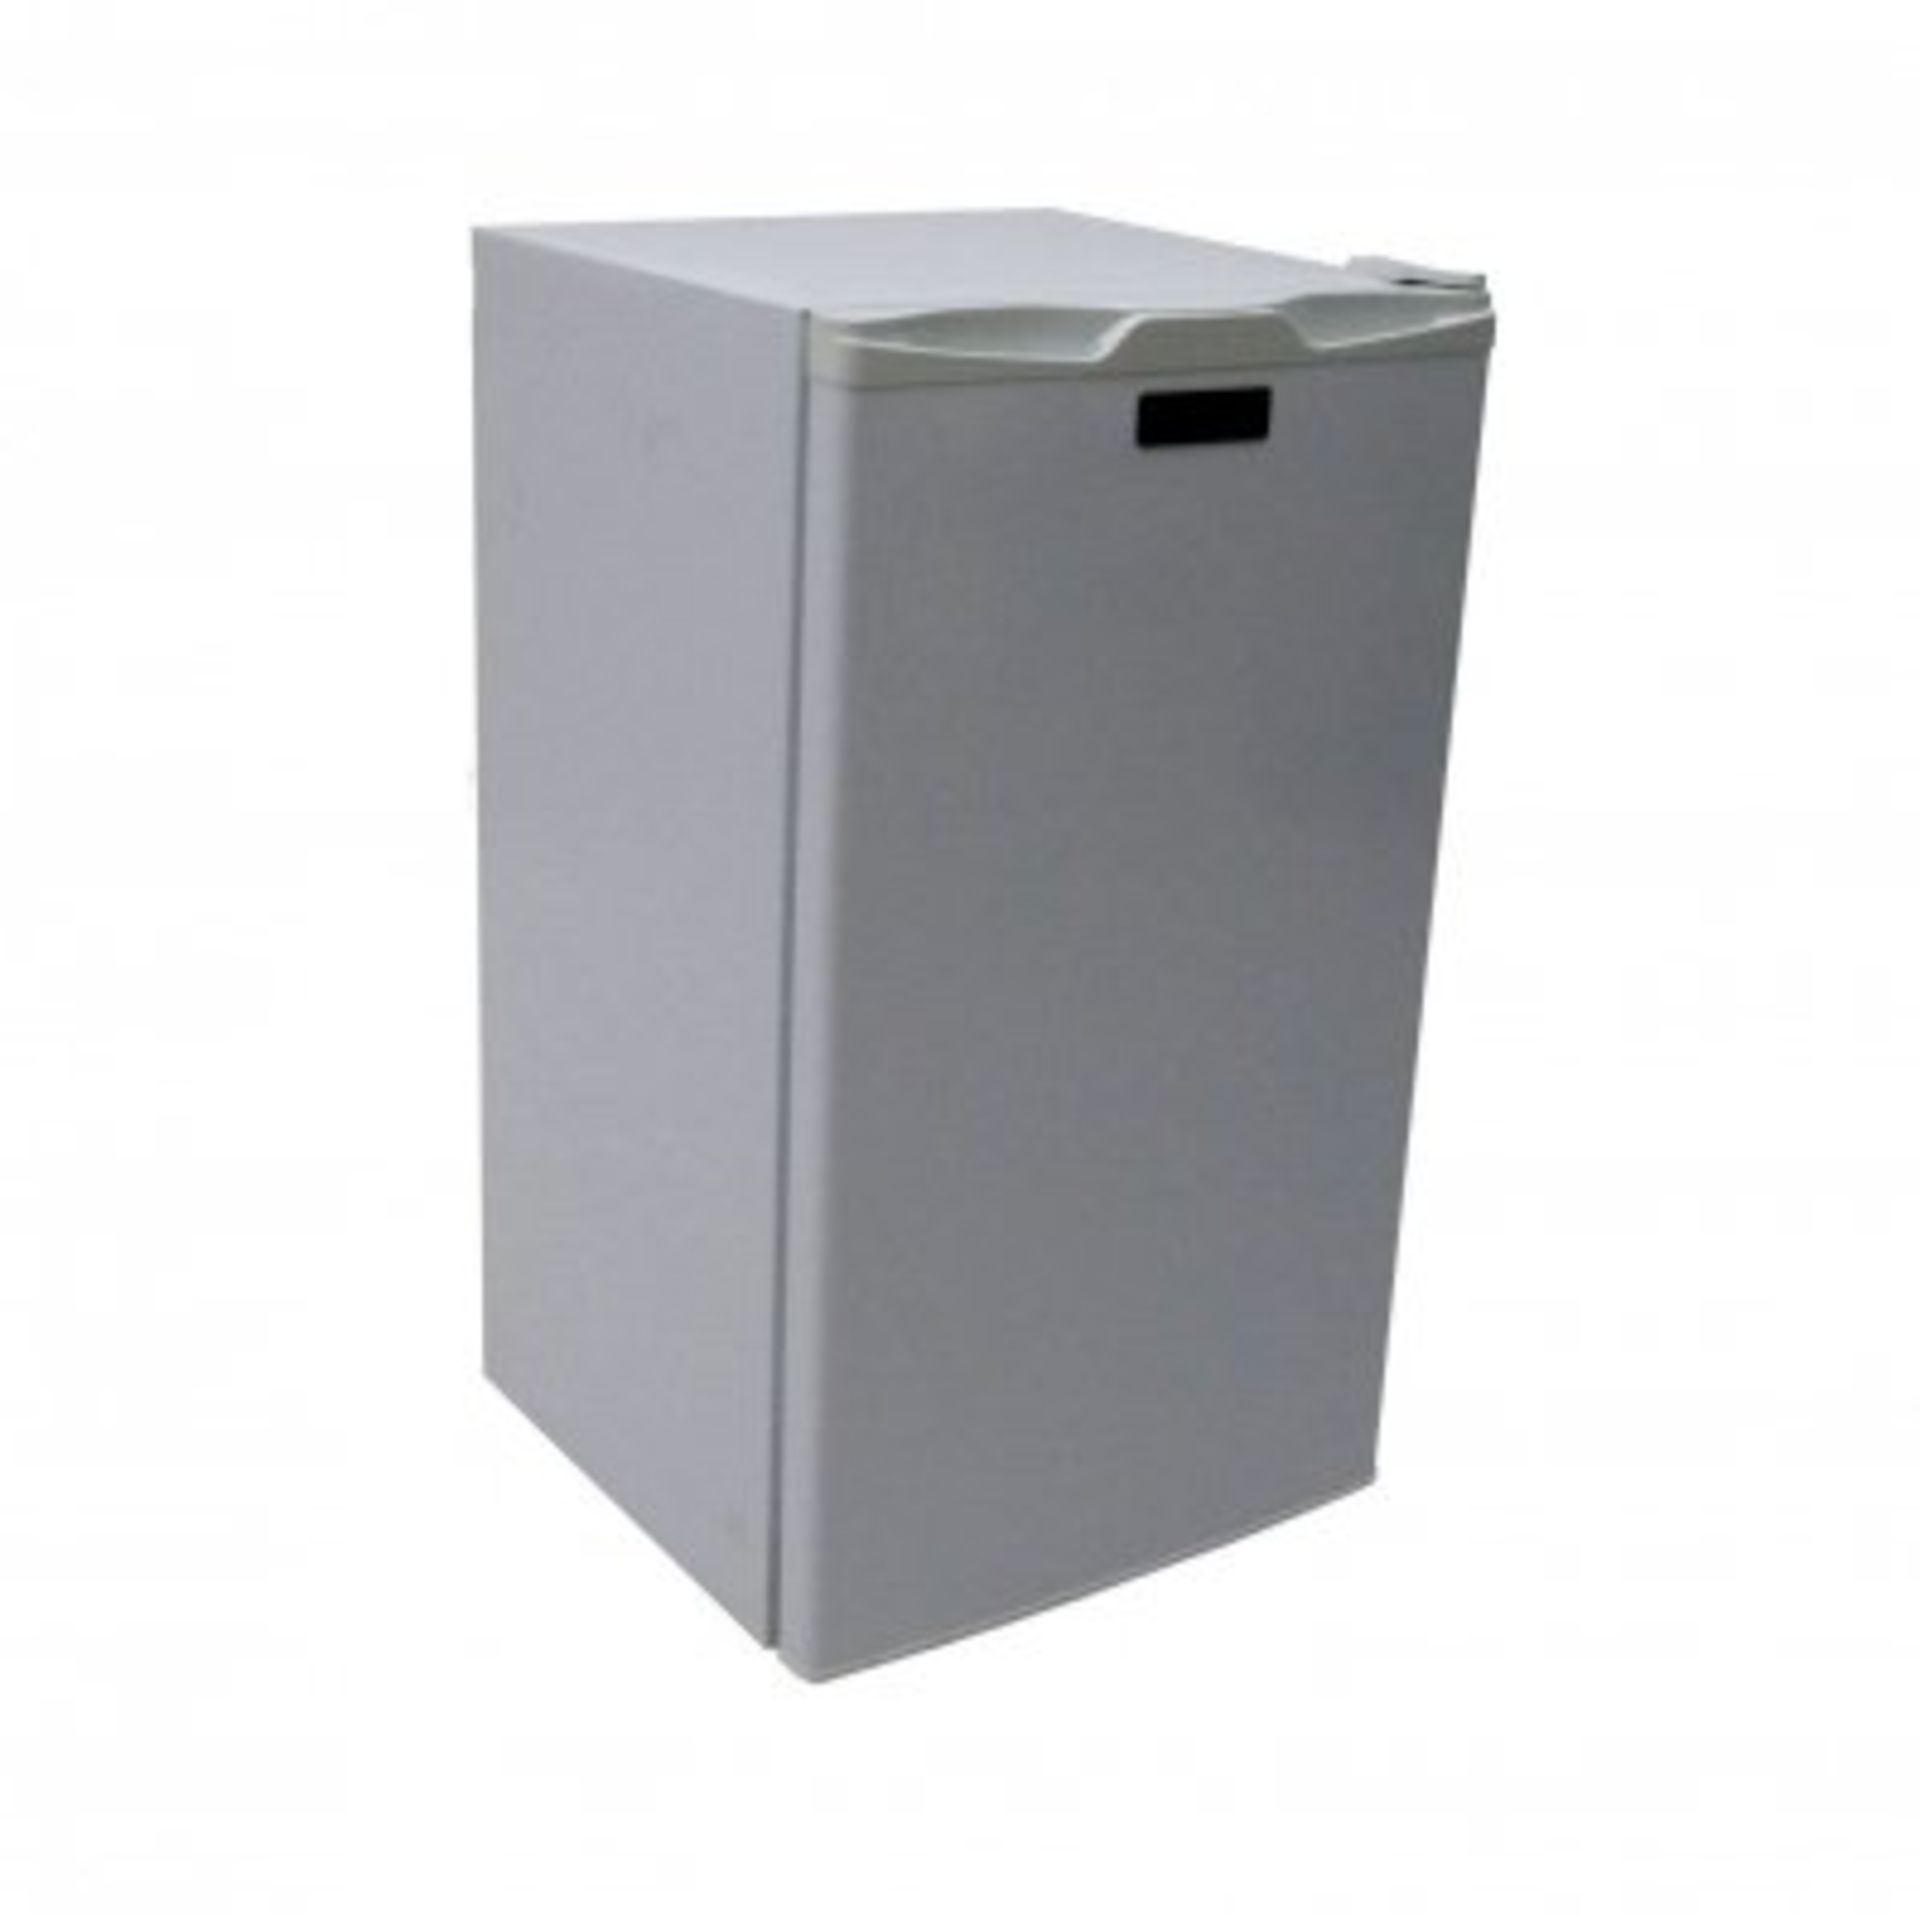 (KK14) The under counter 90L fridge offers a space saving compact design with all the top quali... - Image 2 of 2